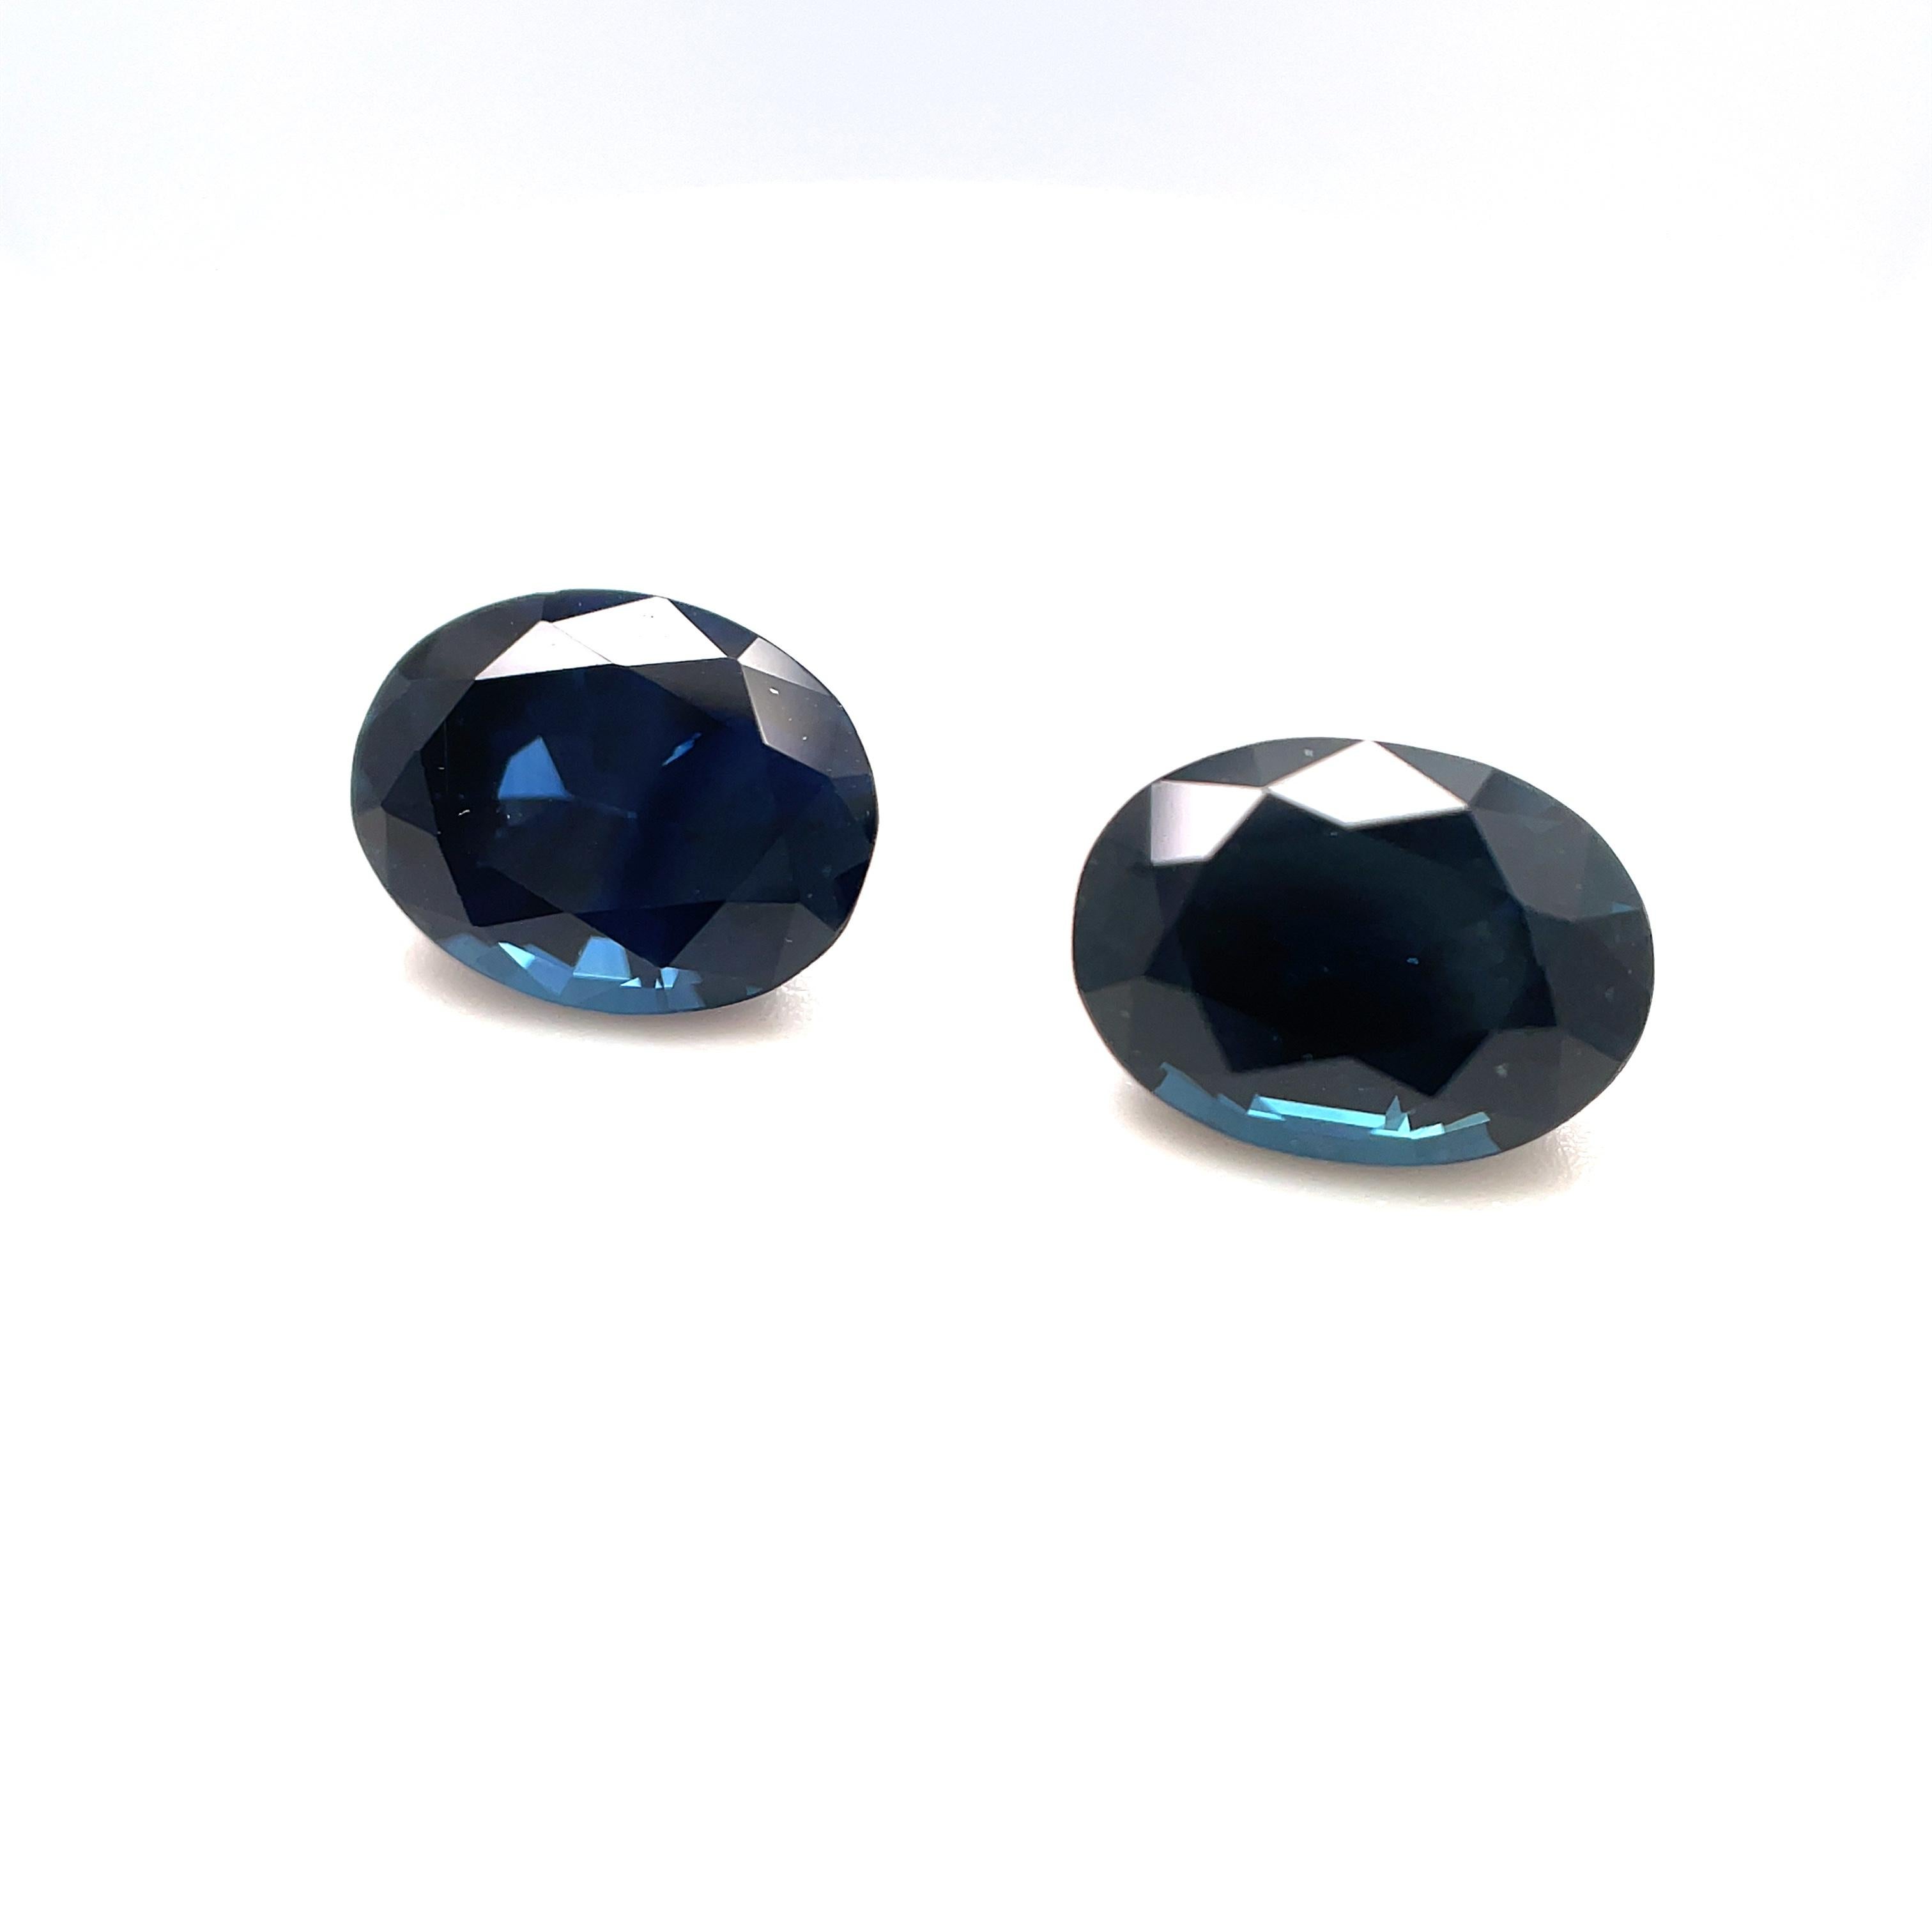 Oval Cut  Royal Blue Sapphire Pair, 3.82 Carats Total, Loose Gemstones for Earrings For Sale